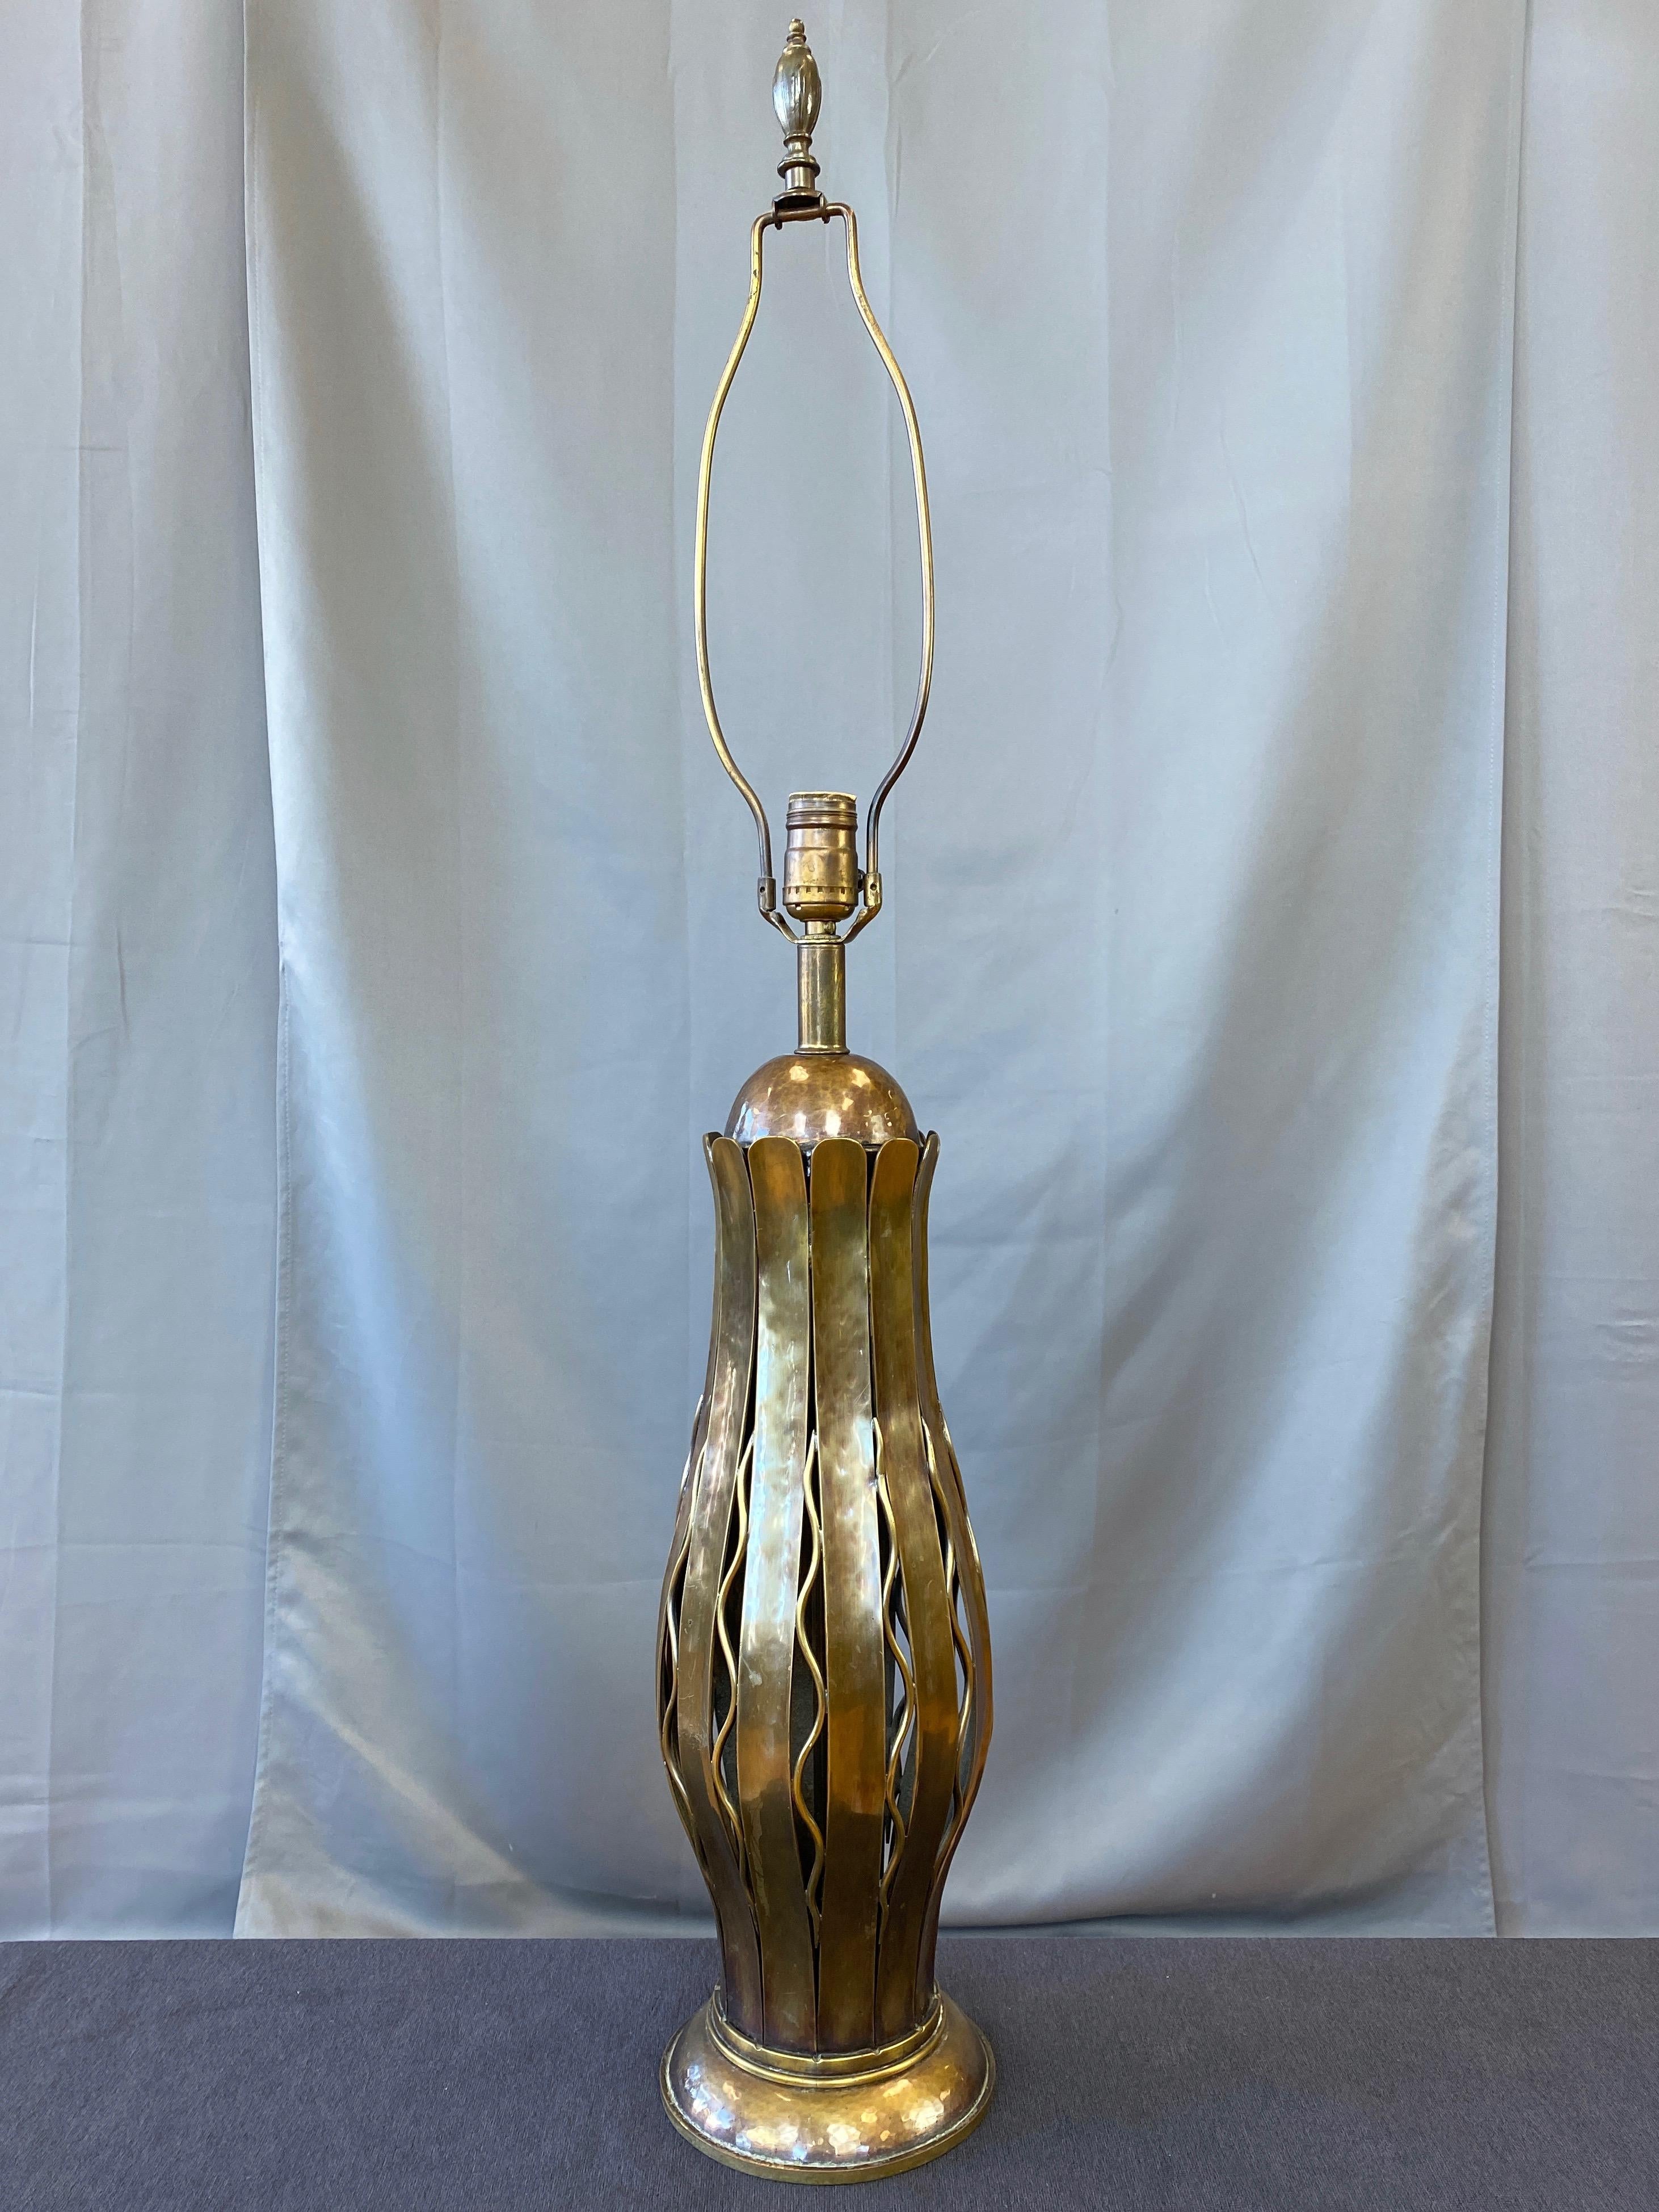 Very uncommon 1950s Hollywood Regency hammered copper & brass tall table lamp custom made exclusively by Hans Grag for Gump’s of San Francisco.

Skillfully hand-shaped and hammered copper half-dome cap and gracefully worked copper (or copper-toned